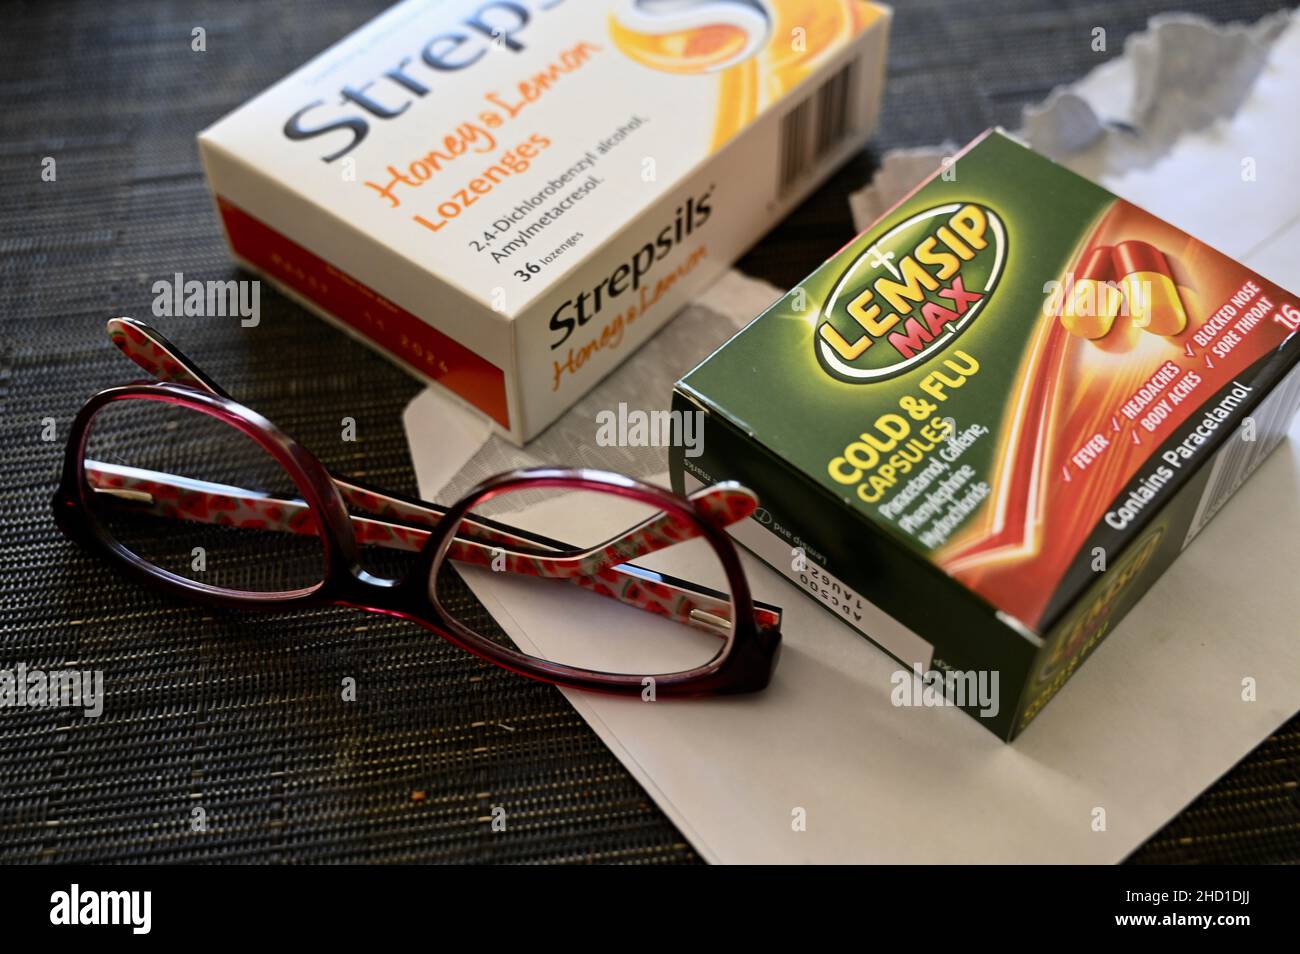 Medicine for sore throat colds and flu. Stock Photo